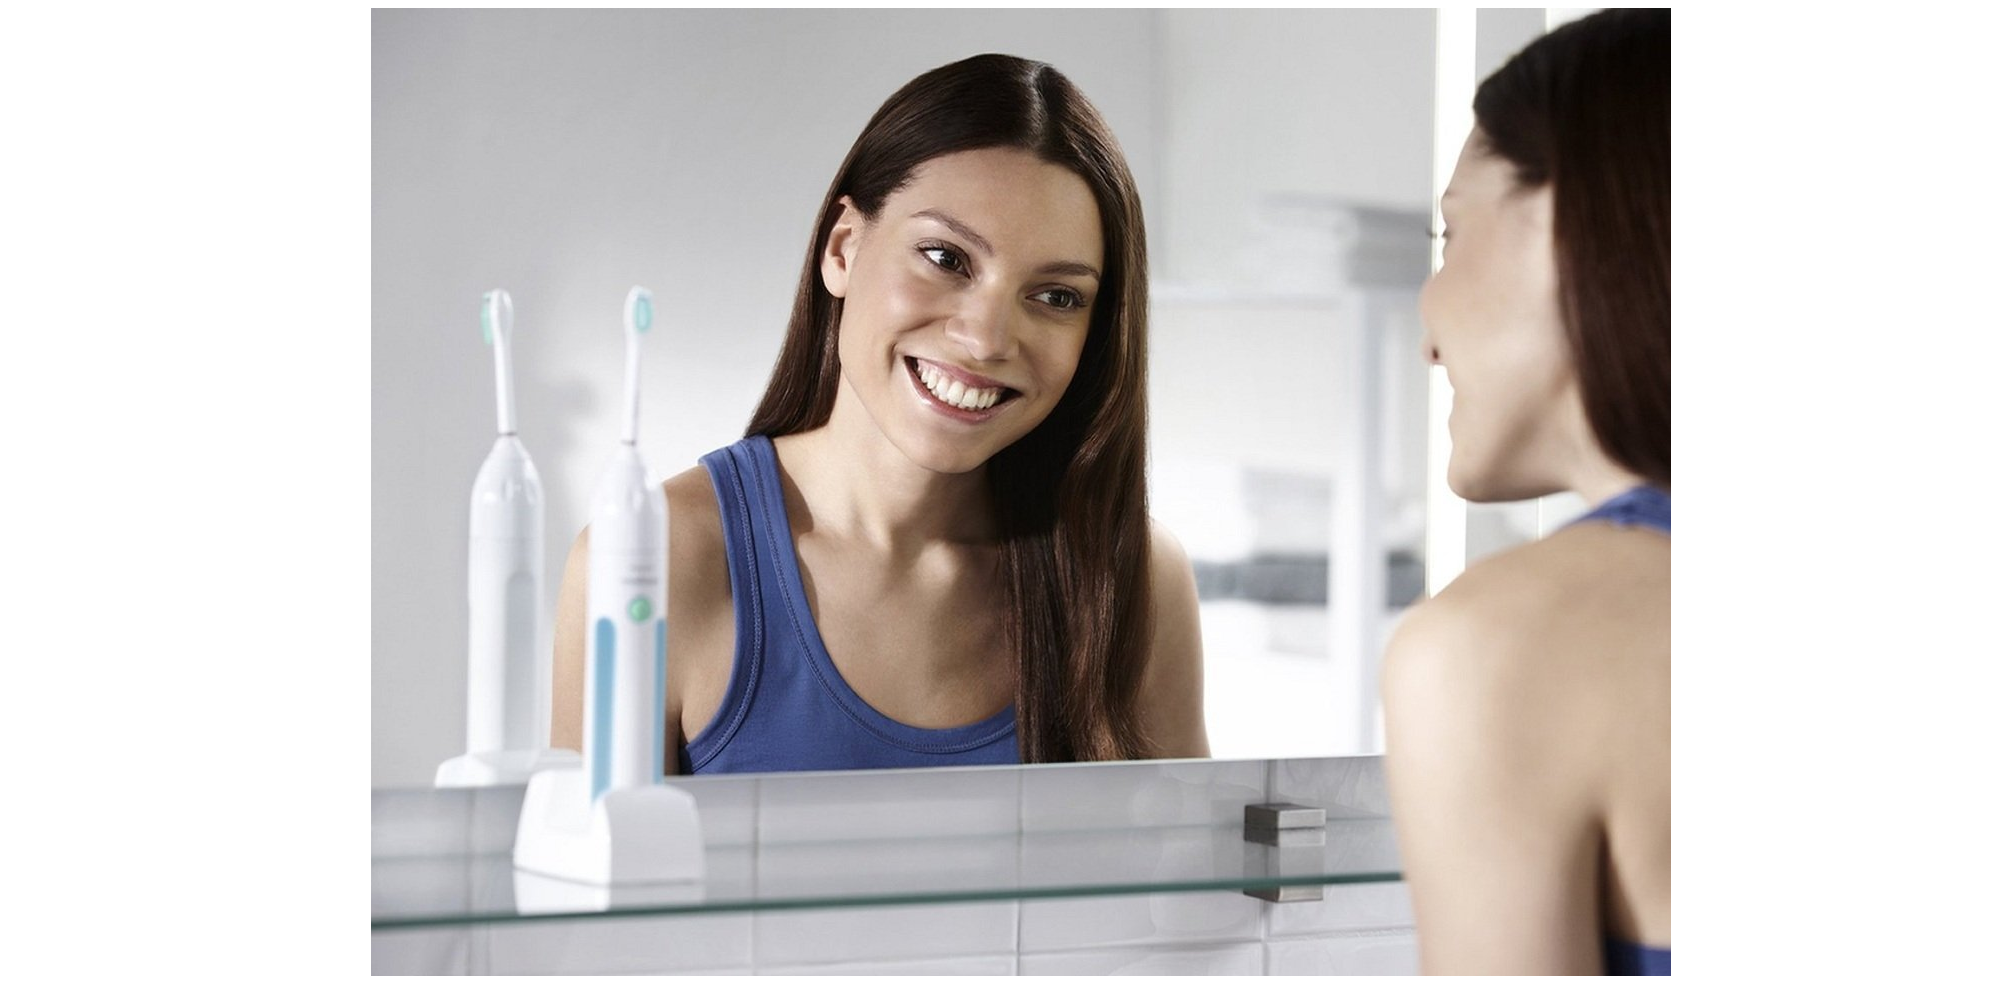 Philips Sonicare Essence Sonic Electric Rechargeable Toothbrush Just $19.97! Down From $49.99!